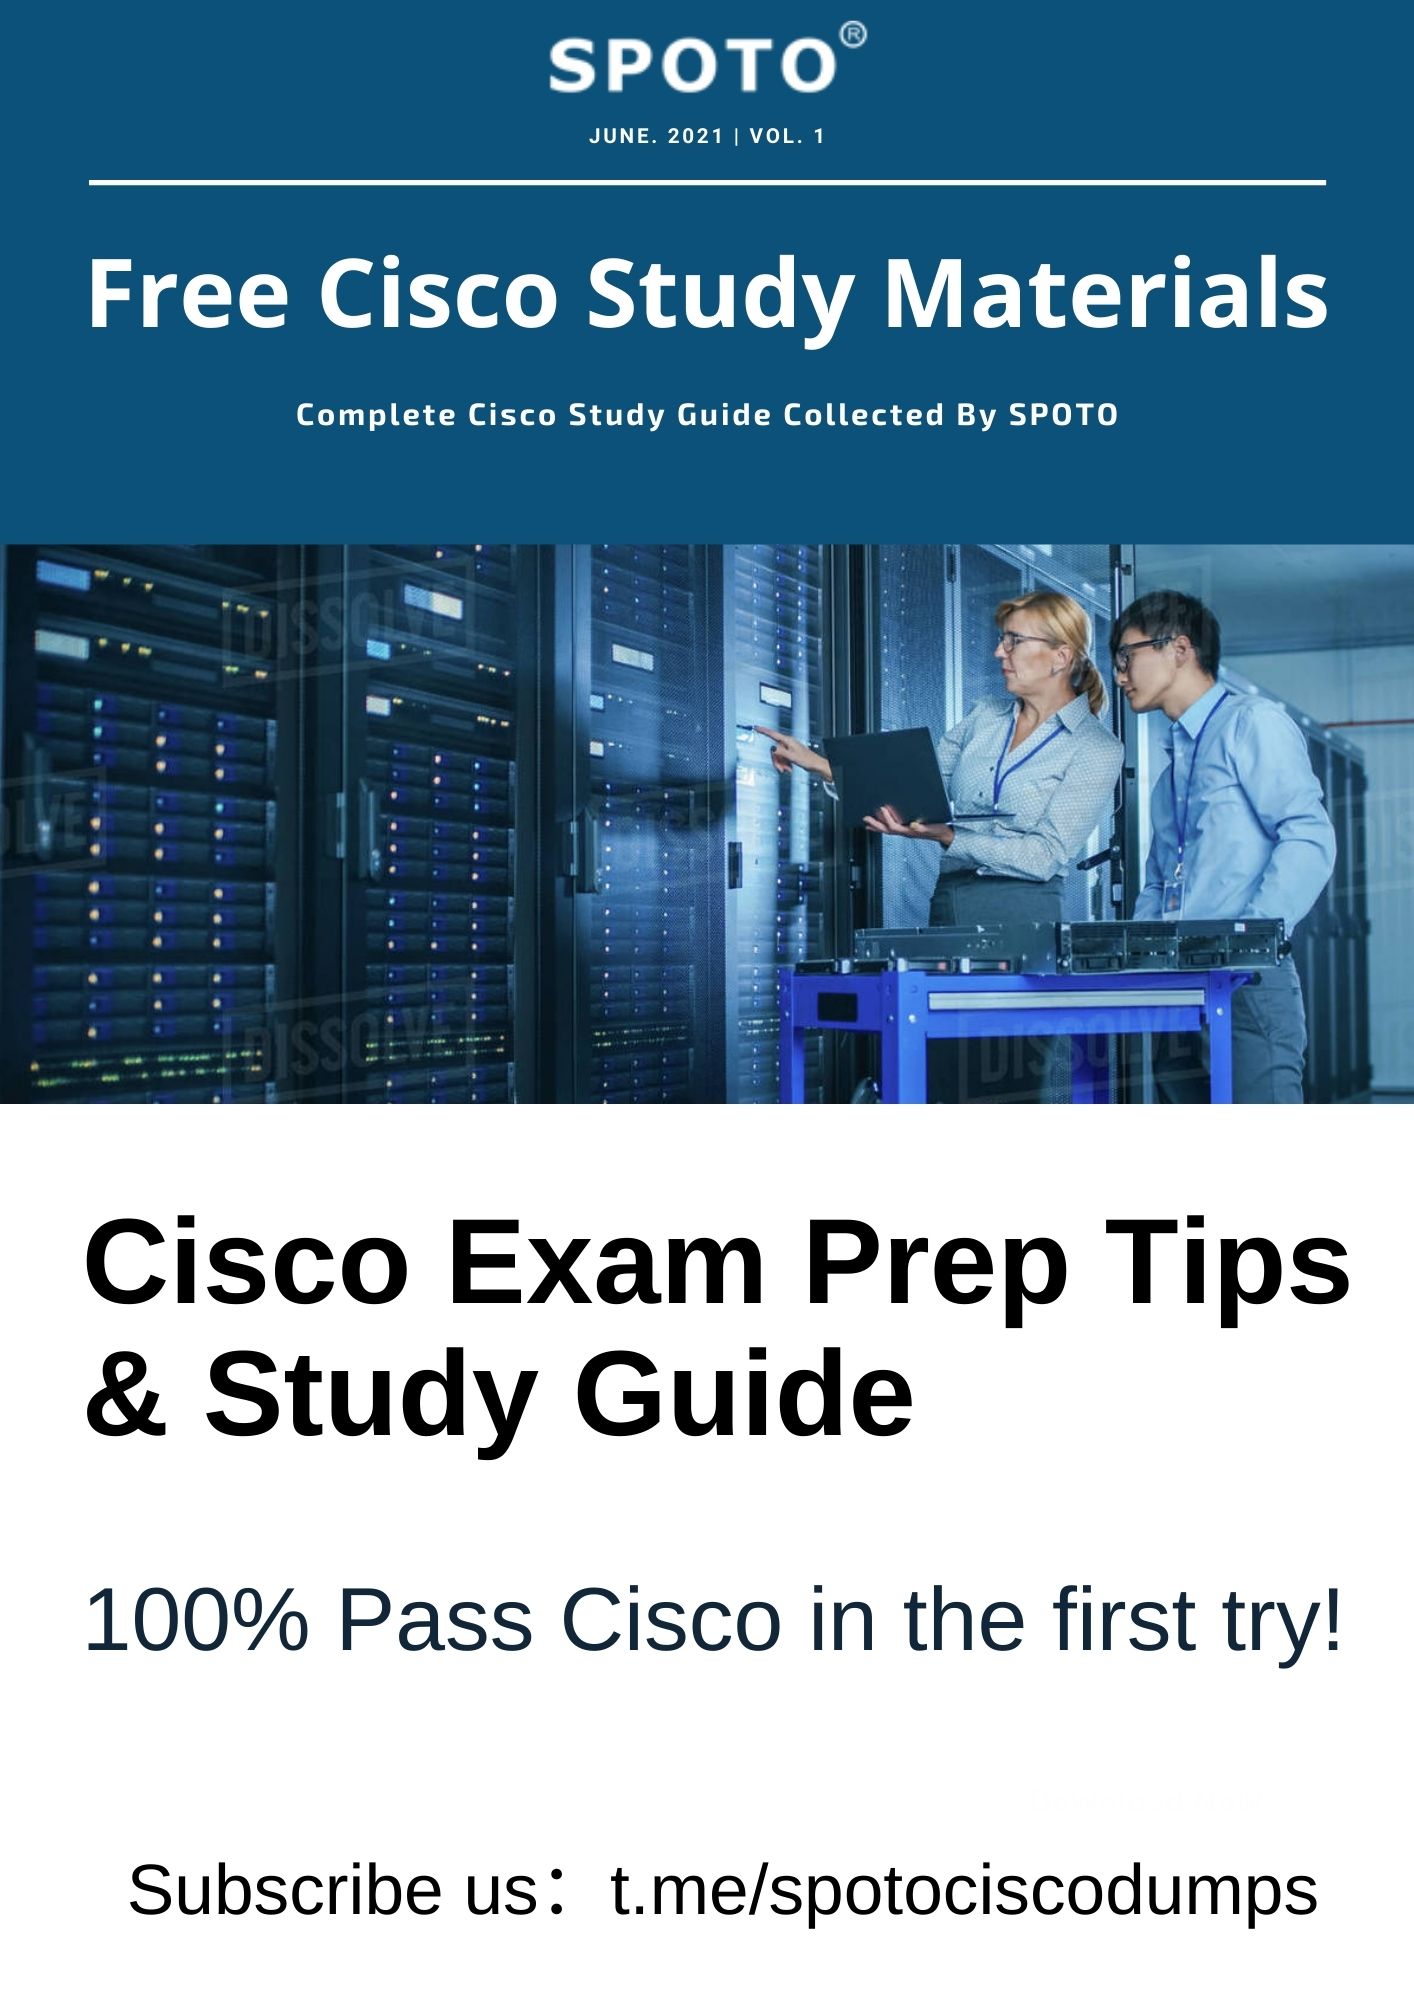 Free Cisco Study Materials-Complete Guide